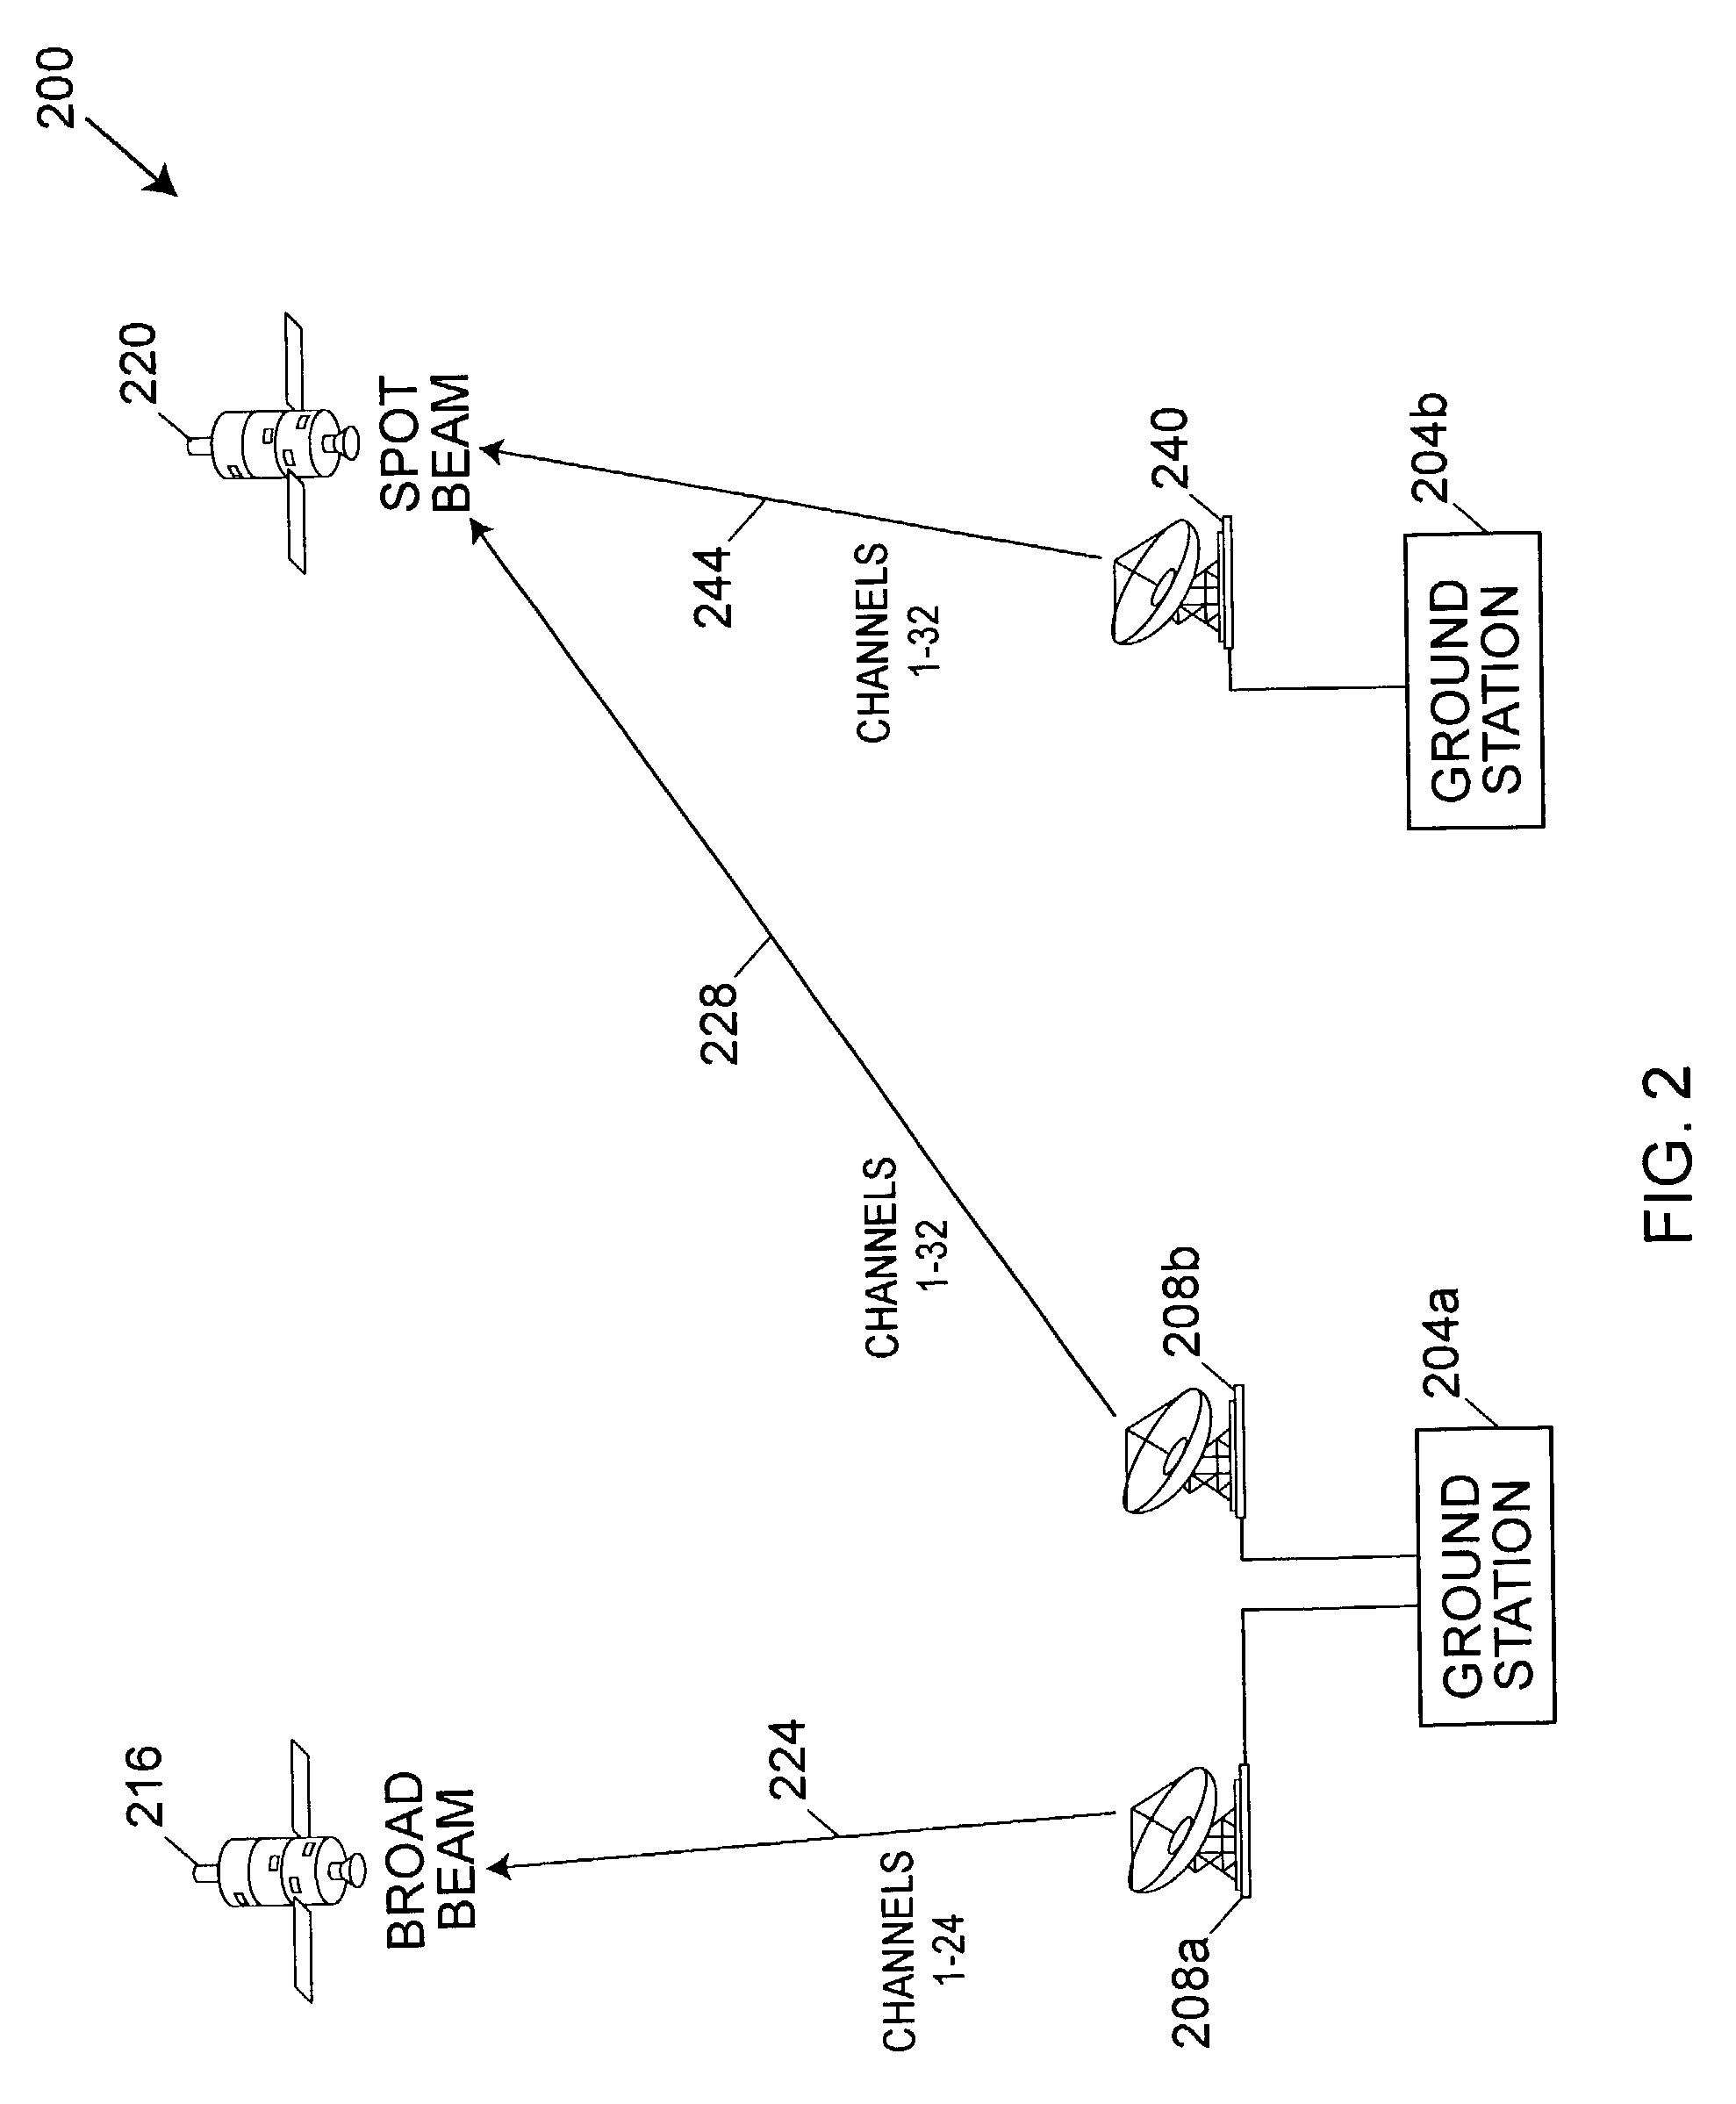 Systems and methods for sharing uplink bandwidth among satellites in a common orbital slot